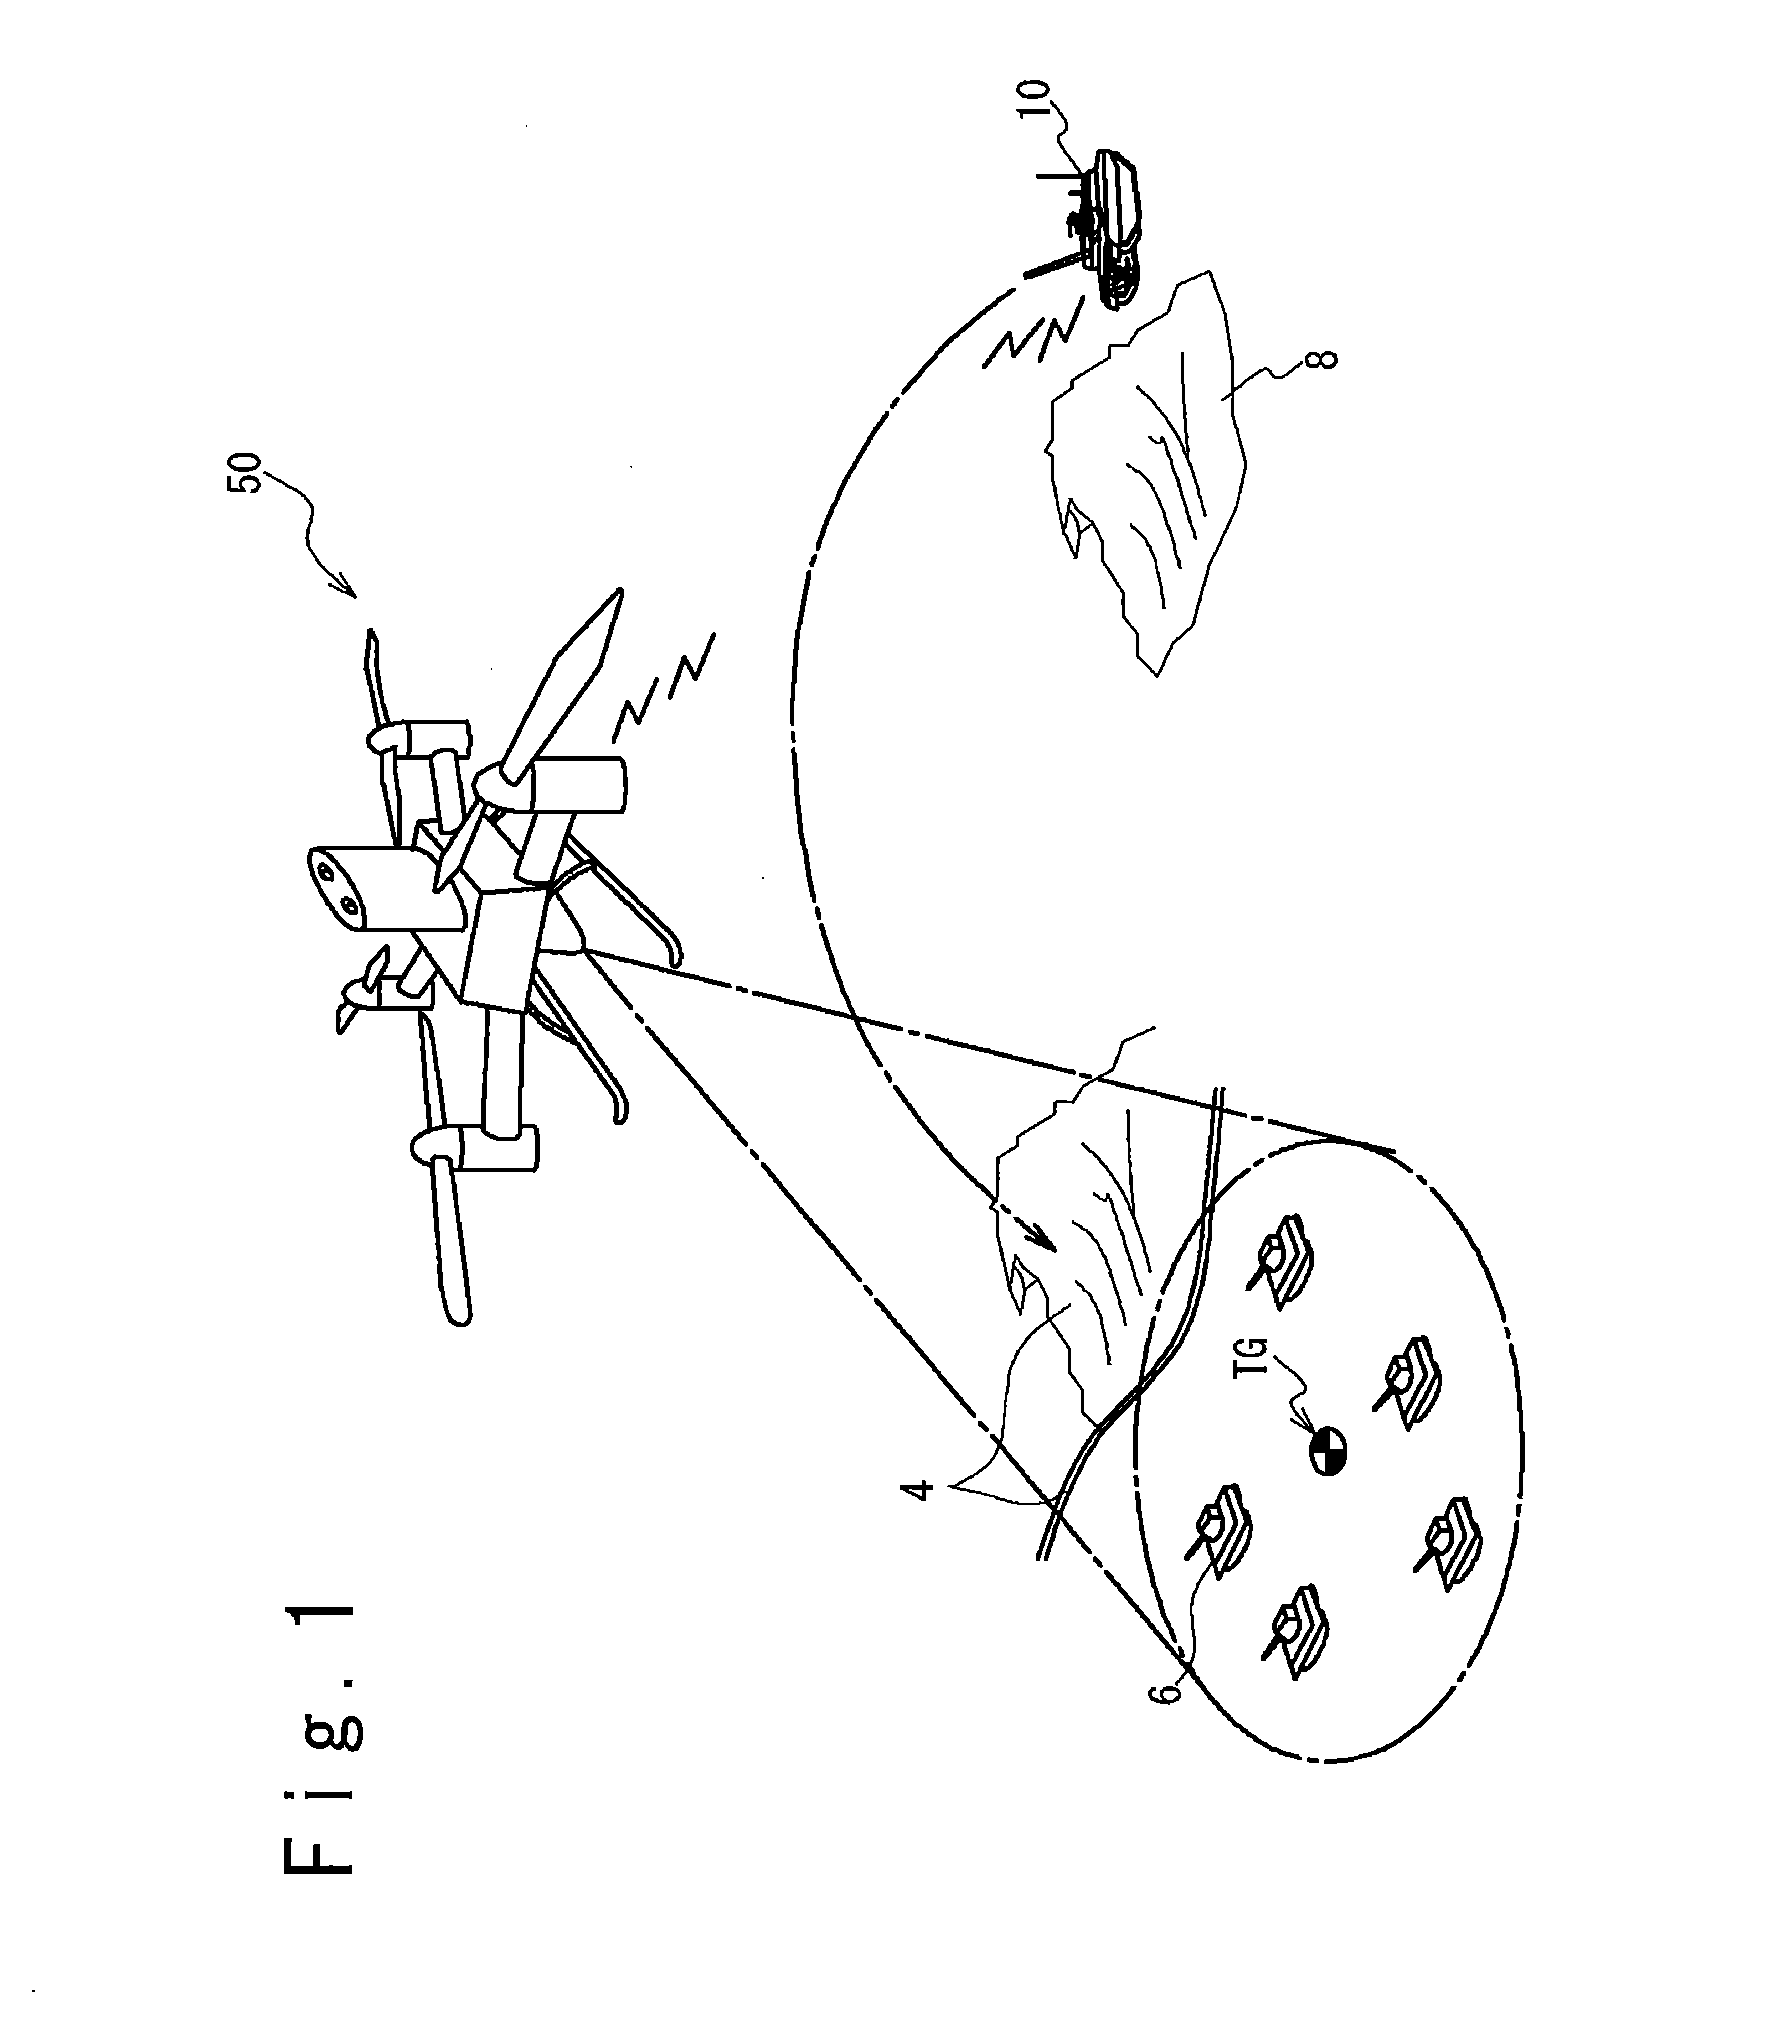 Modularized armor structure with unmanned aerial vehicle loaded and armored vehicle using the same